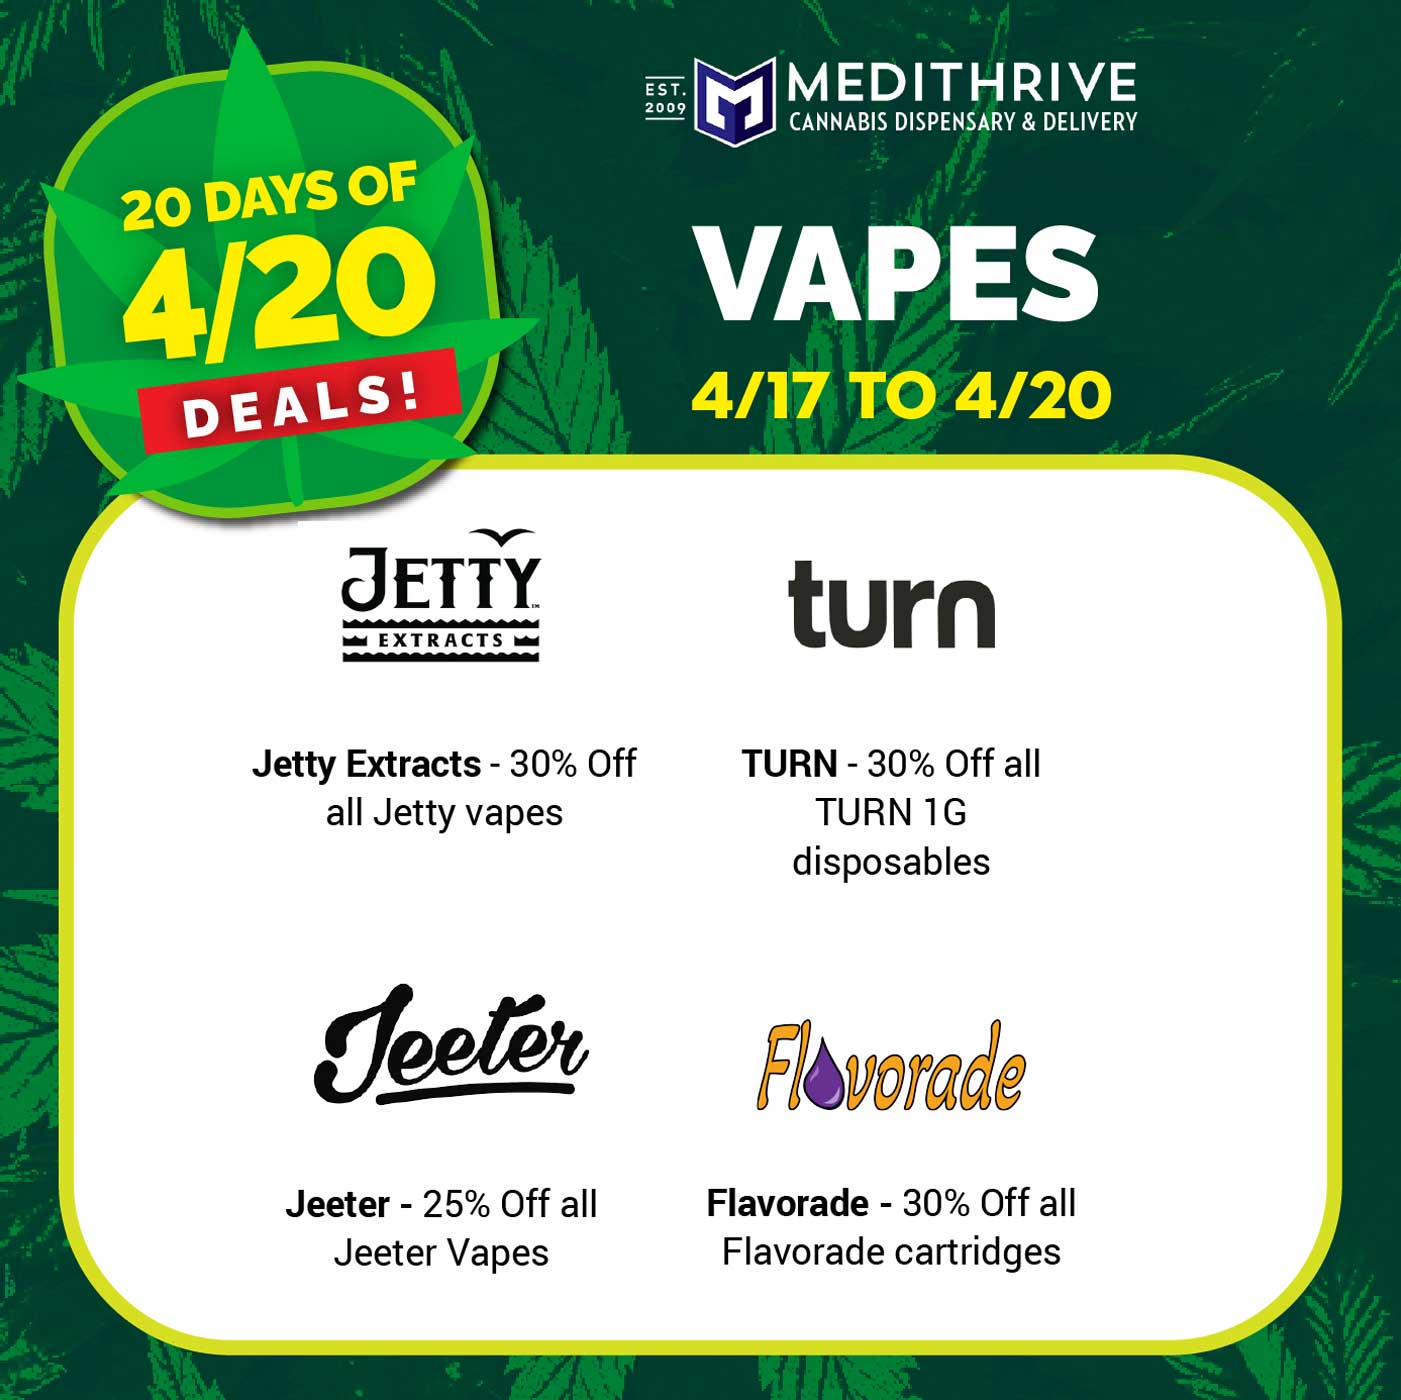 VAPES - 4/17 to 4/20